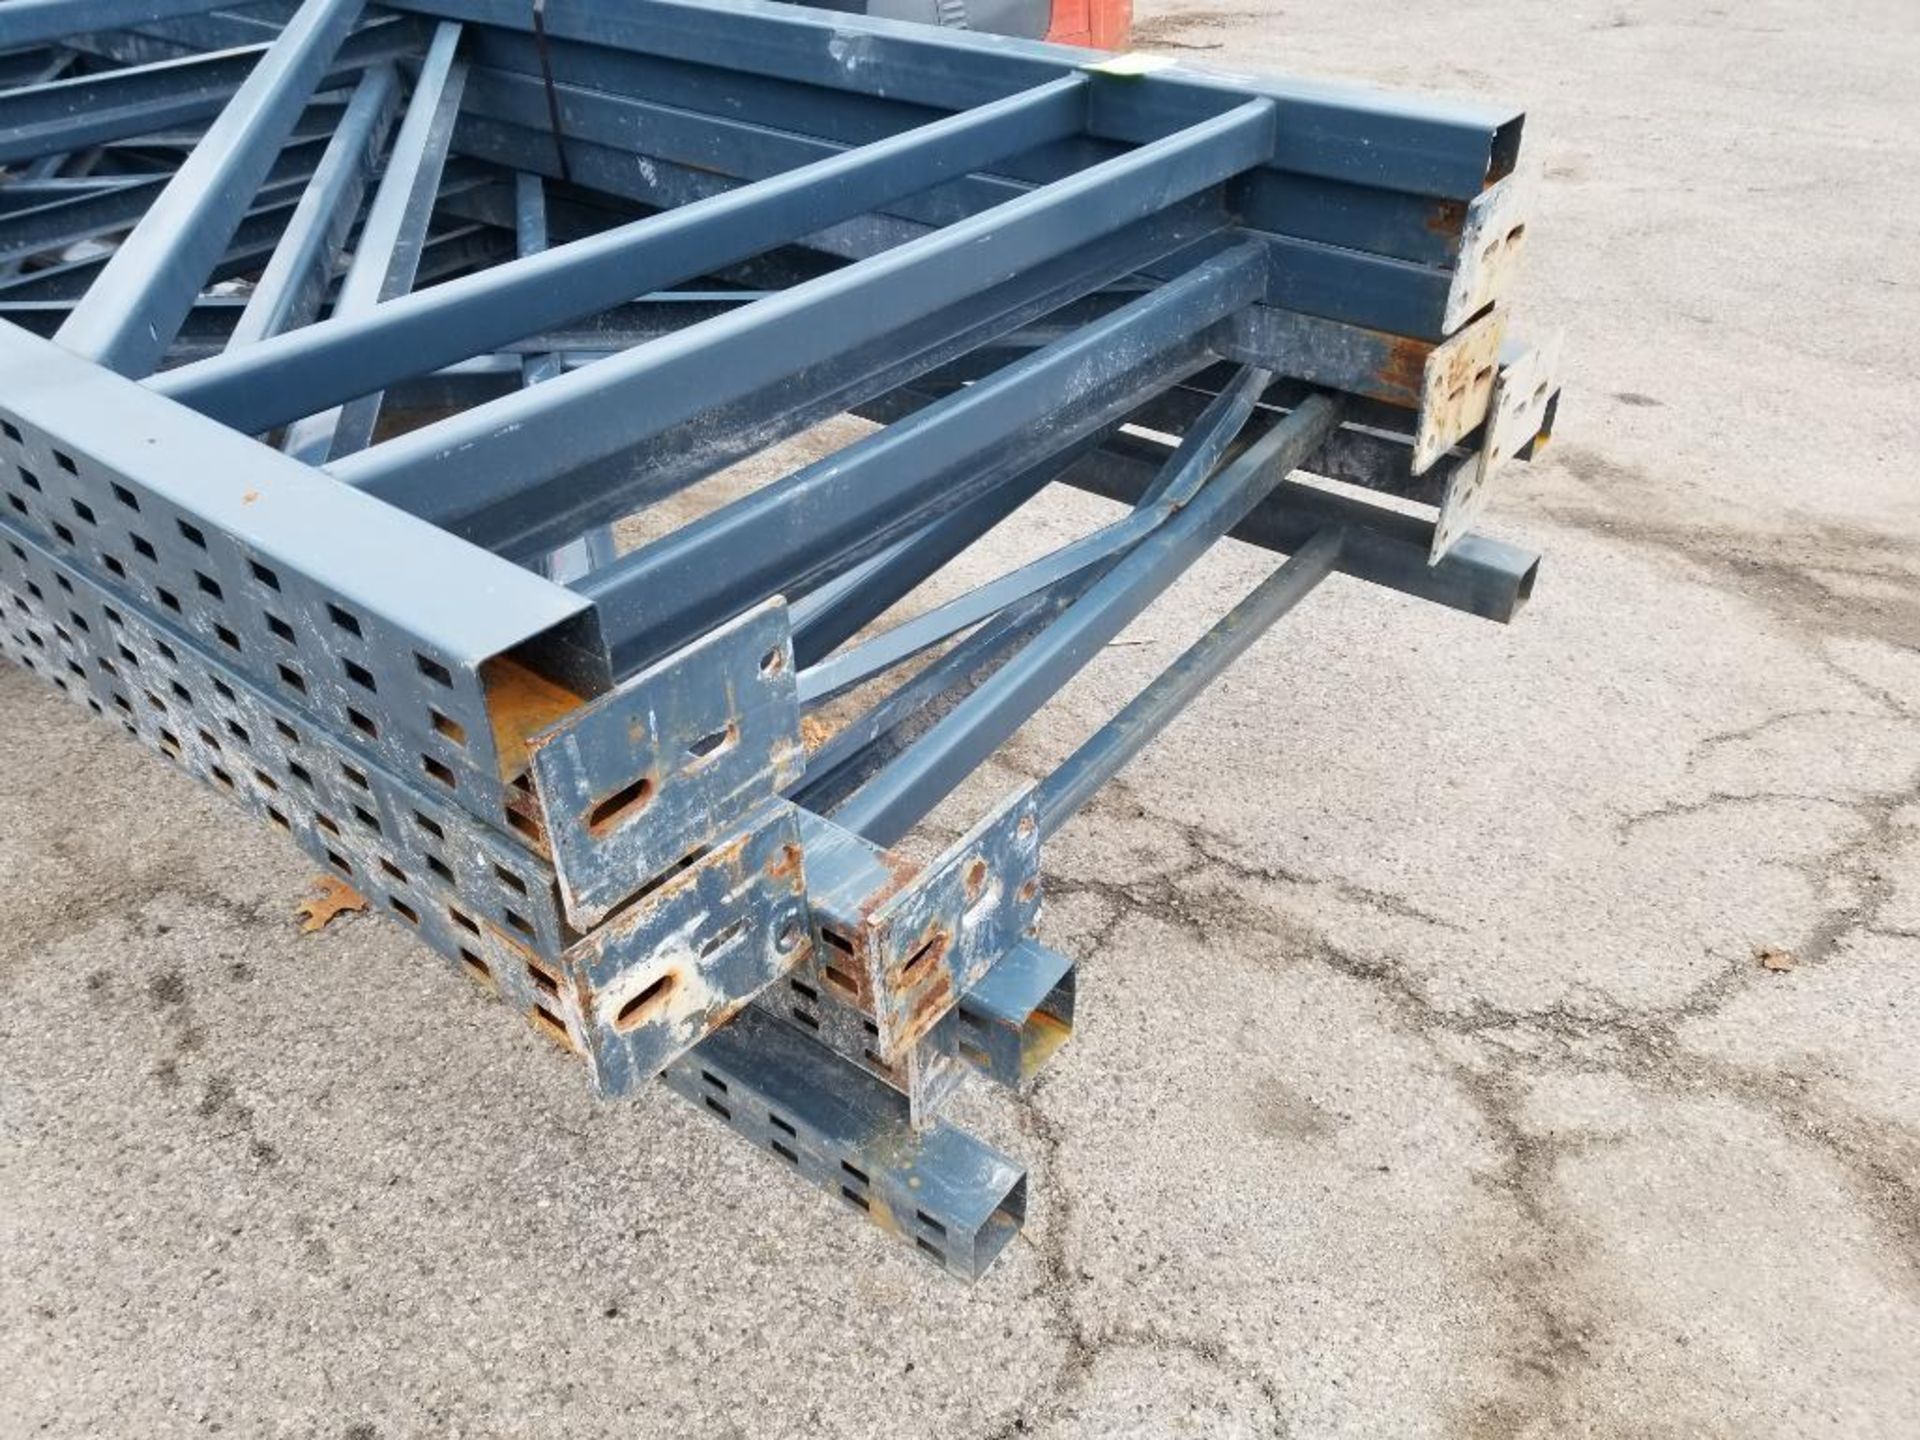 Qty 8 - Pallet racking uprights. 210in tall x 49in wide. - Image 4 of 7